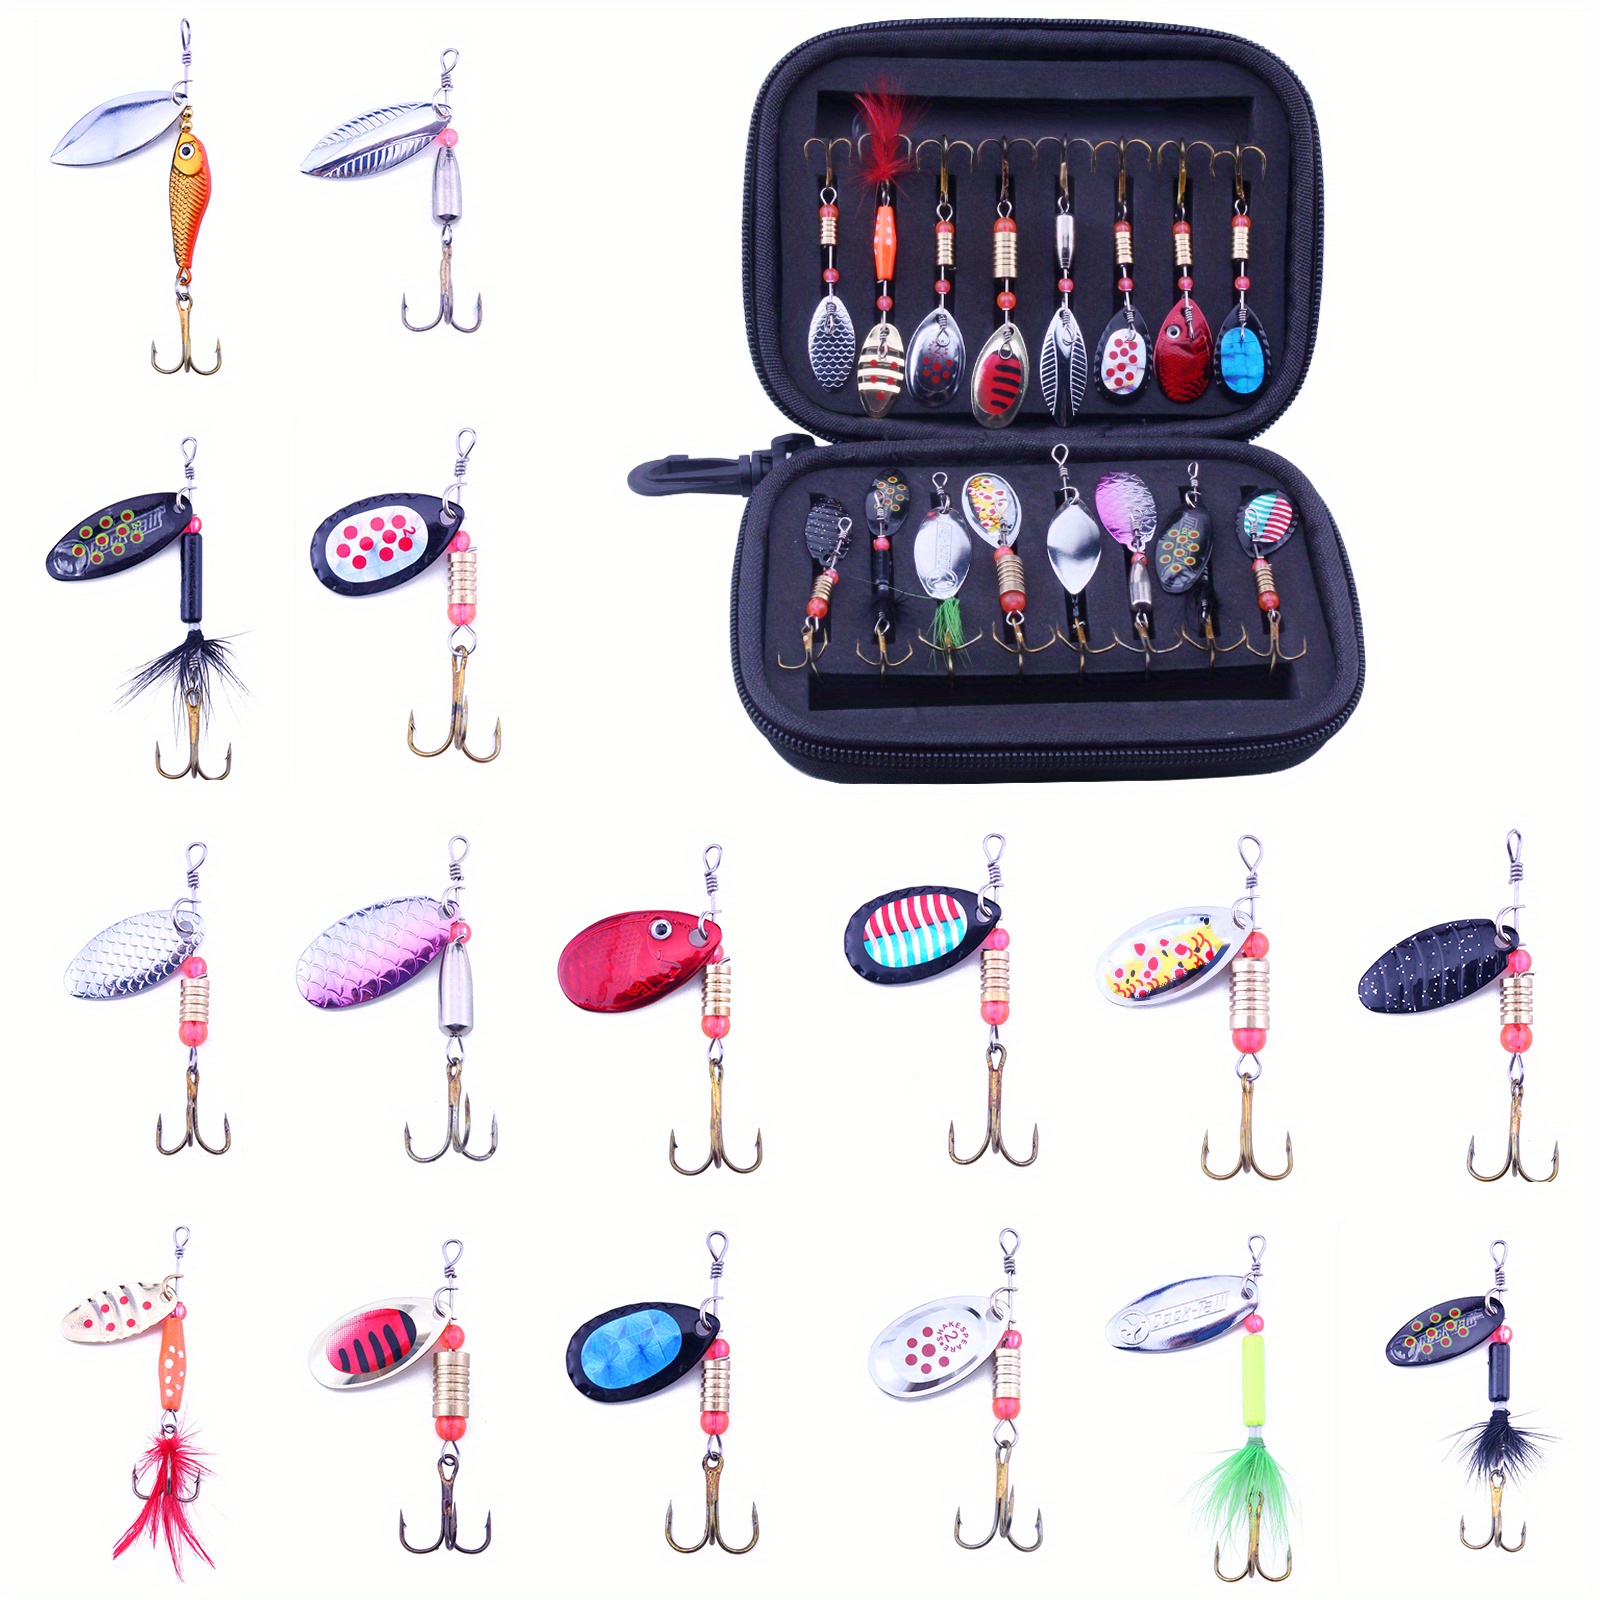 Sconqaek Spinner Baits Set, Bass Fishing Lures for Freshwater, Colorful, Bright, Copper Weights, Premium Non-Rust Hard Metal Spinner Baits Kit with